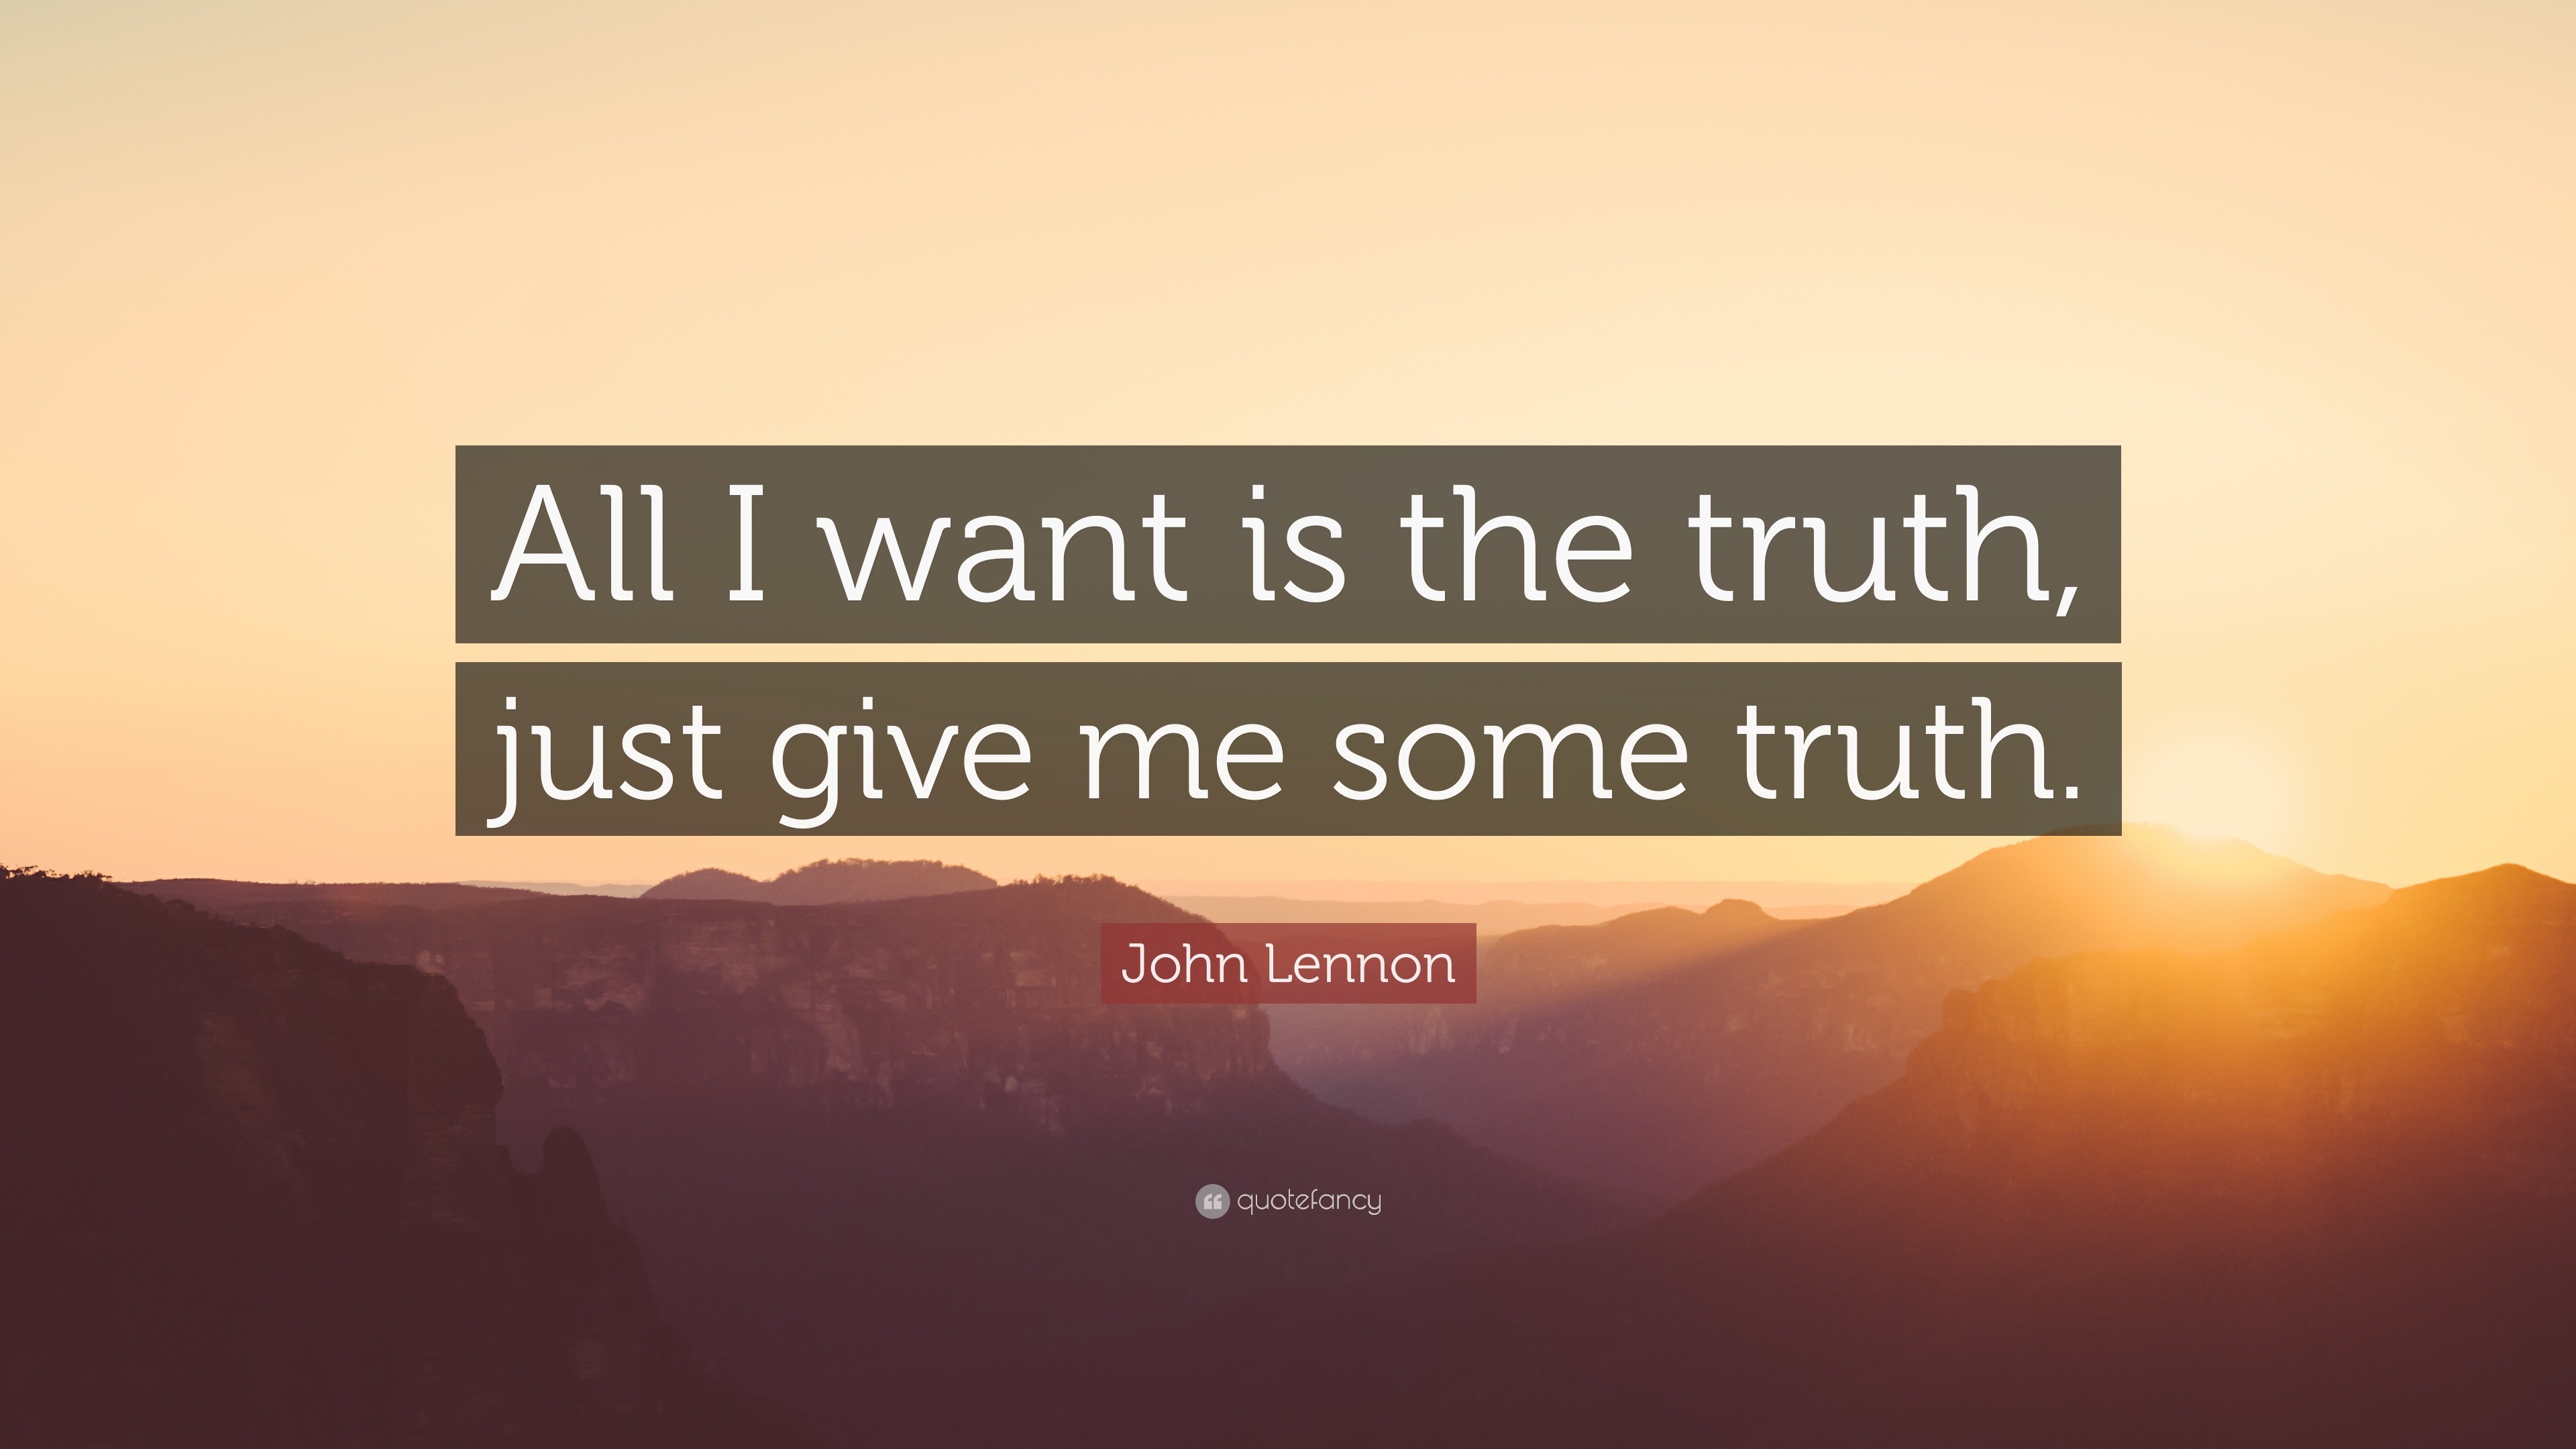 John Lennon Quote: “All I want is the truth, just give me some truth.”